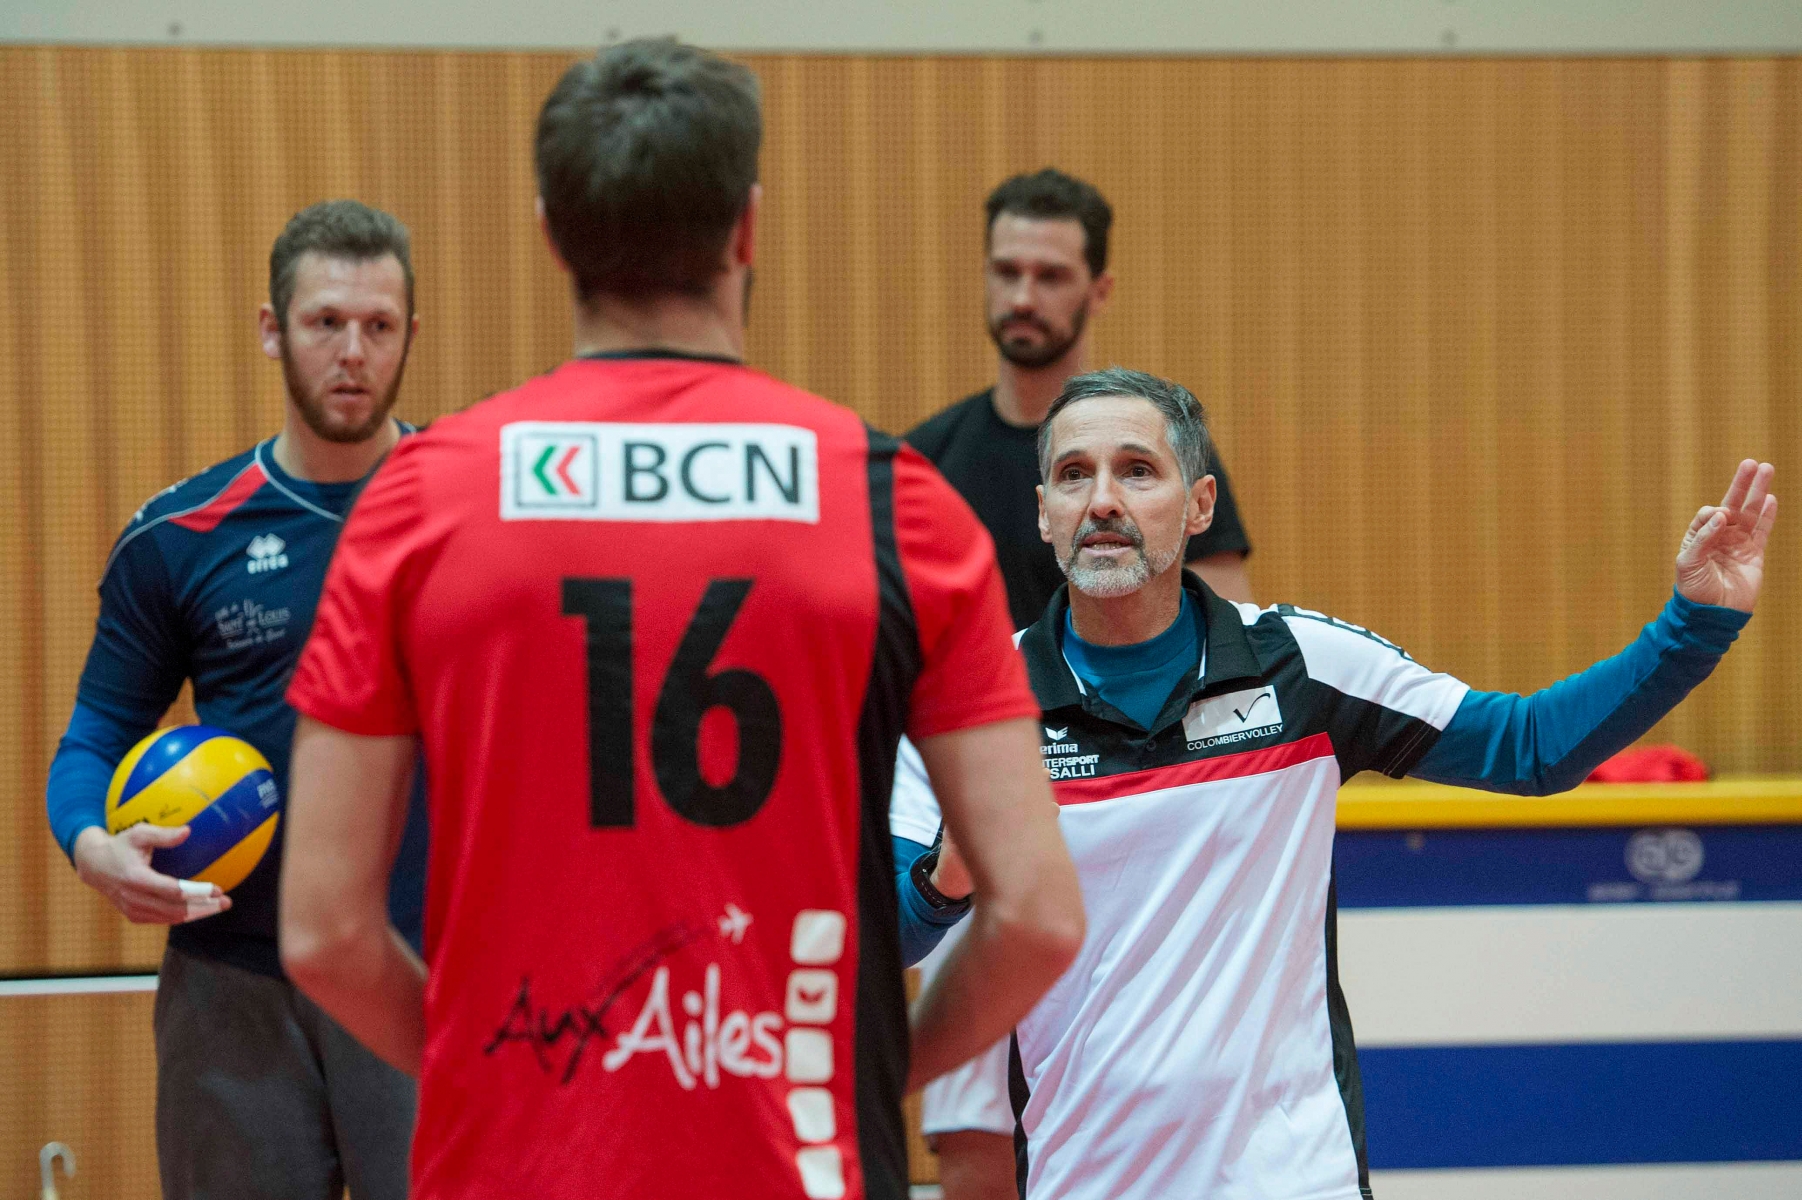 Volleyball VBC Colombier
Luiz Souza coach

COLOMBIER 23 01 2016
PHOTO: Christian Galley VOLLEYBALL